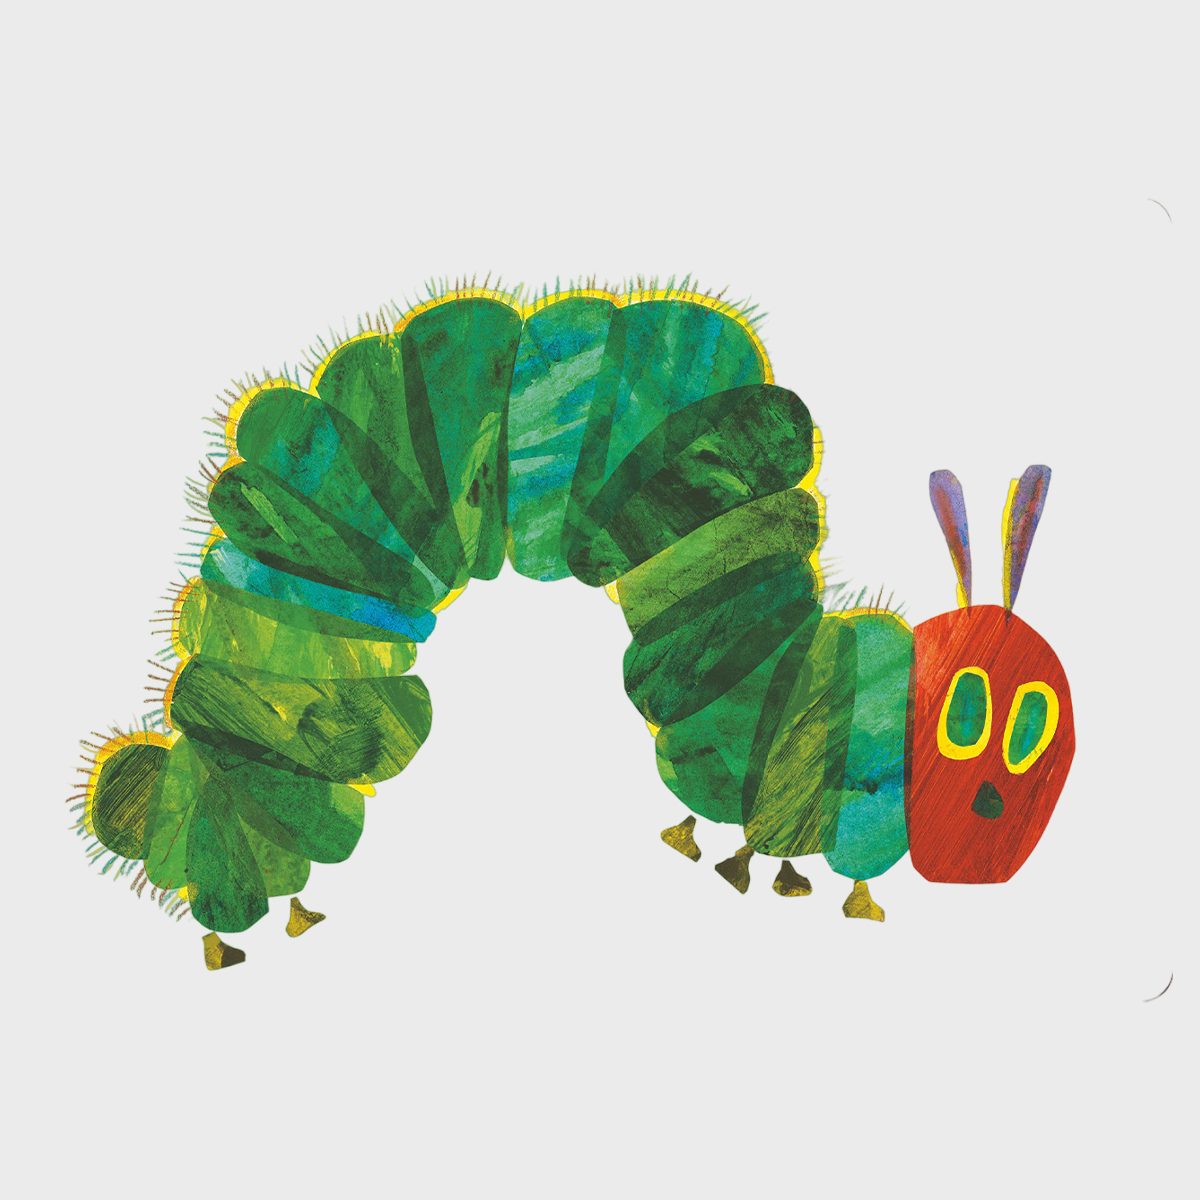 <p>Add this childhood <a href="https://www.amazon.com/Very-Hungry-Caterpillar-Eric-Carle/dp/0399226907" rel="nofollow noopener noreferrer">reading classic</a> with bright, easy-to-see pictures and fun-to-listen-to rhythms, to any bag of baby goodies. This forever-favorite will bring joy to bedtime routines from the earliest days until they read it all by themselves. One of the <a href="https://www.rd.com/list/the-best-childrens-books-ever-written/" rel="noopener noreferrer">best children's books</a> of all time, it's a must-have for every baby and new parent.</p> <p class="listicle-page__cta-button-shop"><a class="shop-btn" href="https://www.amazon.com/Very-Hungry-Caterpillar-Eric-Carle/dp/0399226907">Shop Now</a></p>